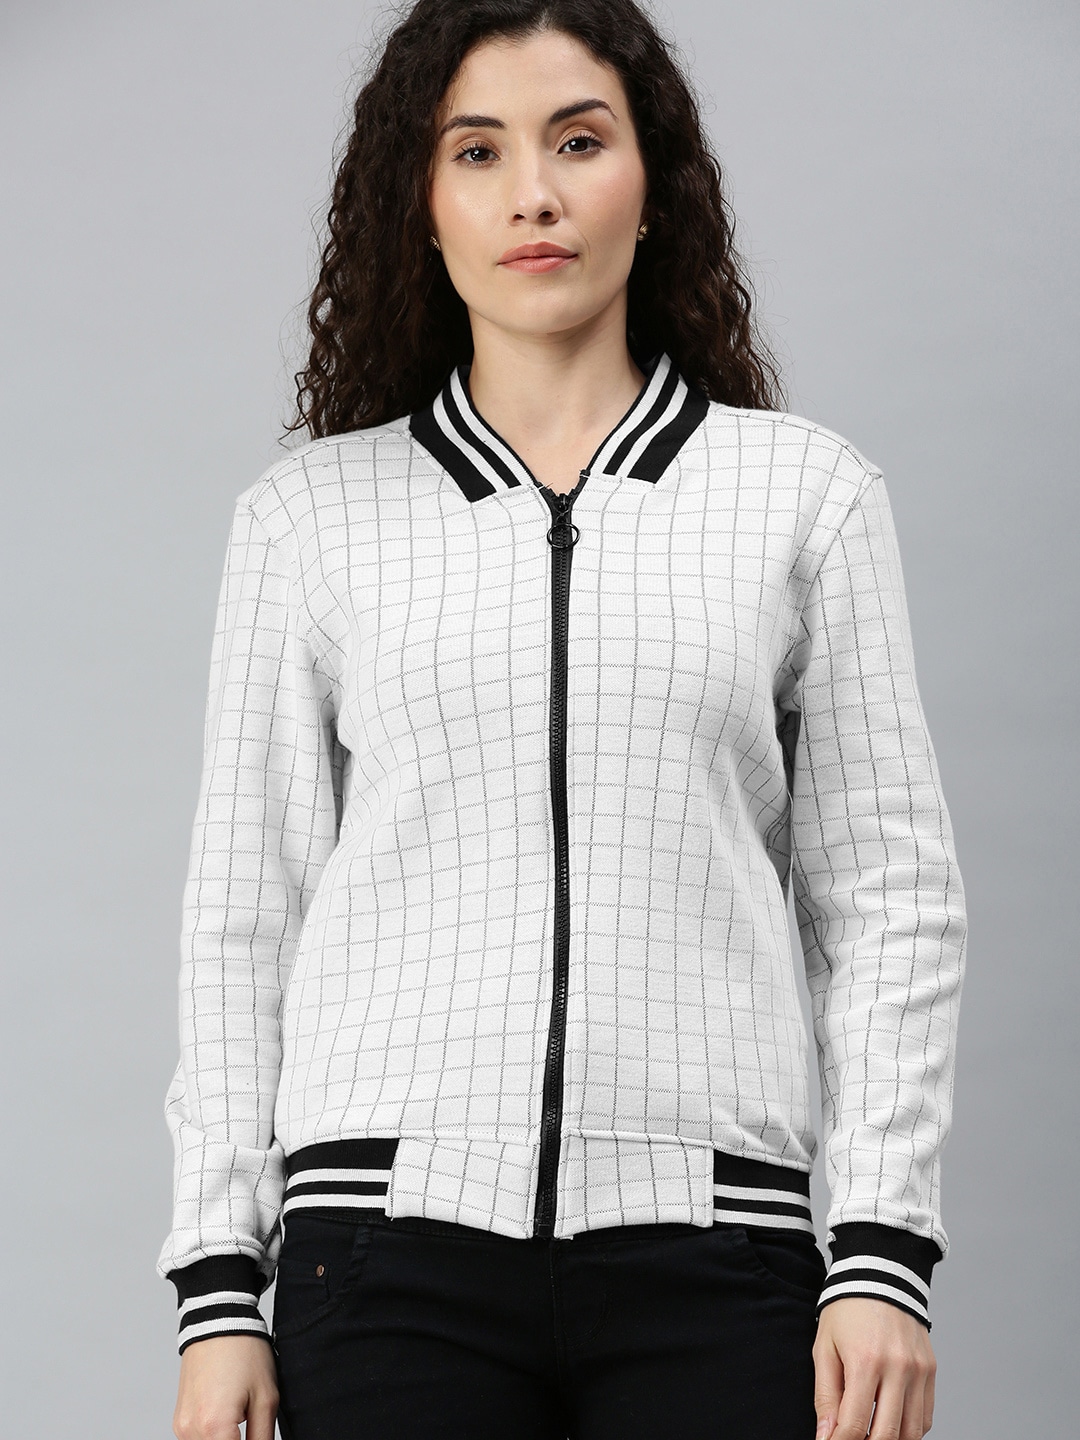 Campus Sutra Women Grey & Black Checked Front Open Sweatshirt Price in India